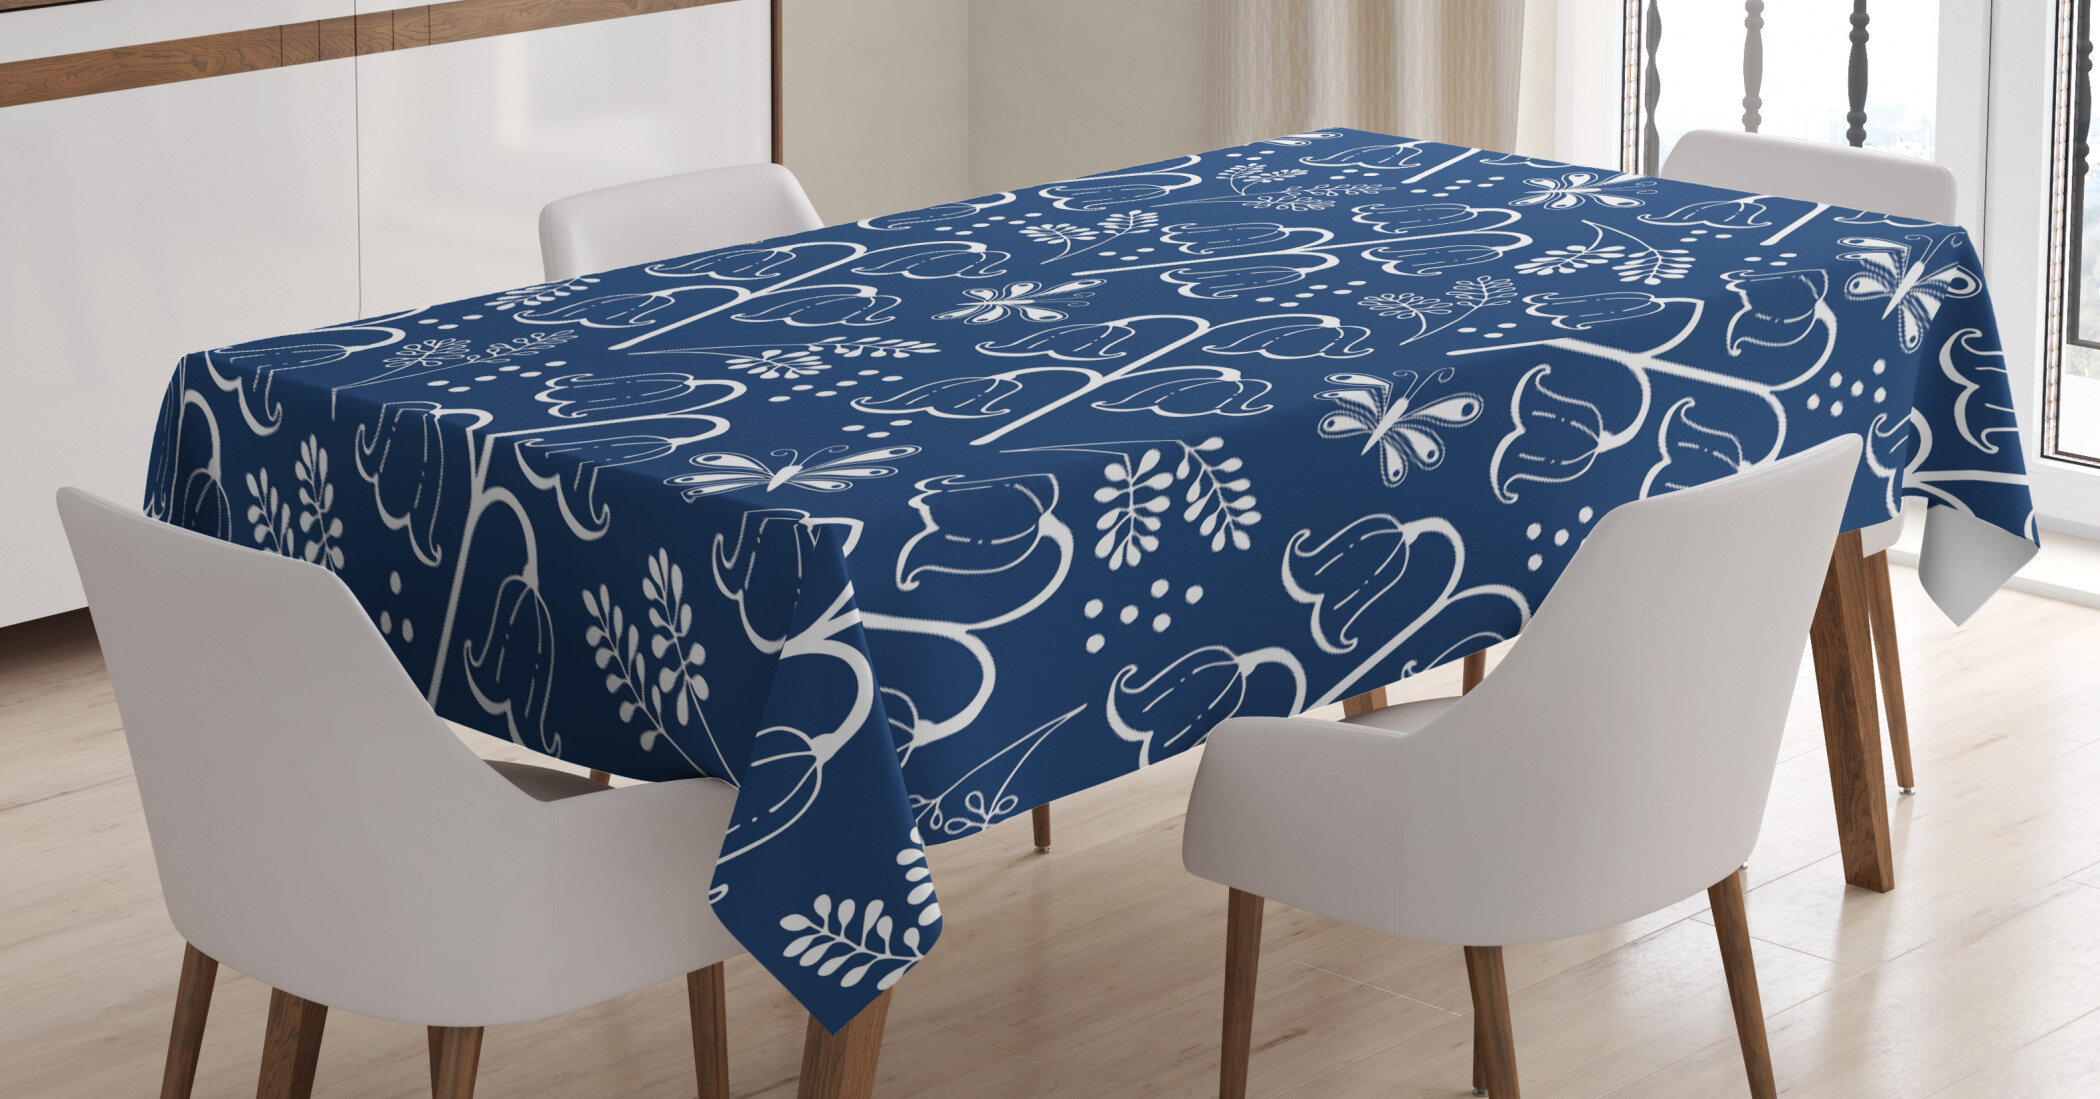 Floral Field Amaryllis Daffodil Blossom Romantic Design 52 X 70 Dining Room Kitchen Rectangular Table Cover Ambesonne Garden Tablecloth Hunter Green Mustard Almond Green